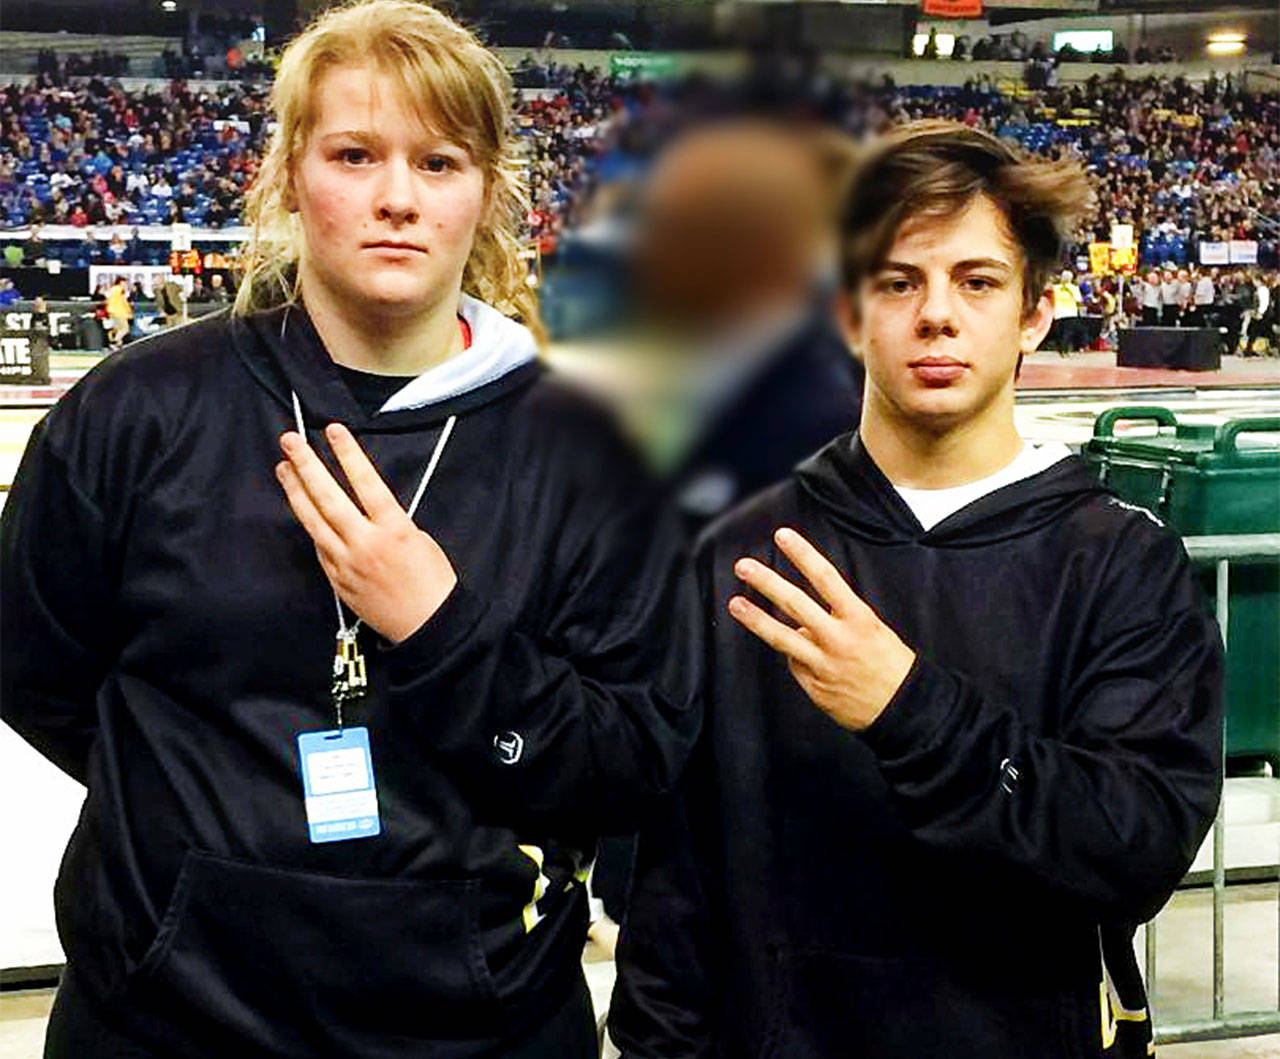 North Beach High School Hyaks wrestlers Natasha Früh and Garrett Armbruster both came home from the Washington State Mat Classic XXX Championships at the Tacoma Dome last weekend with third place medals.